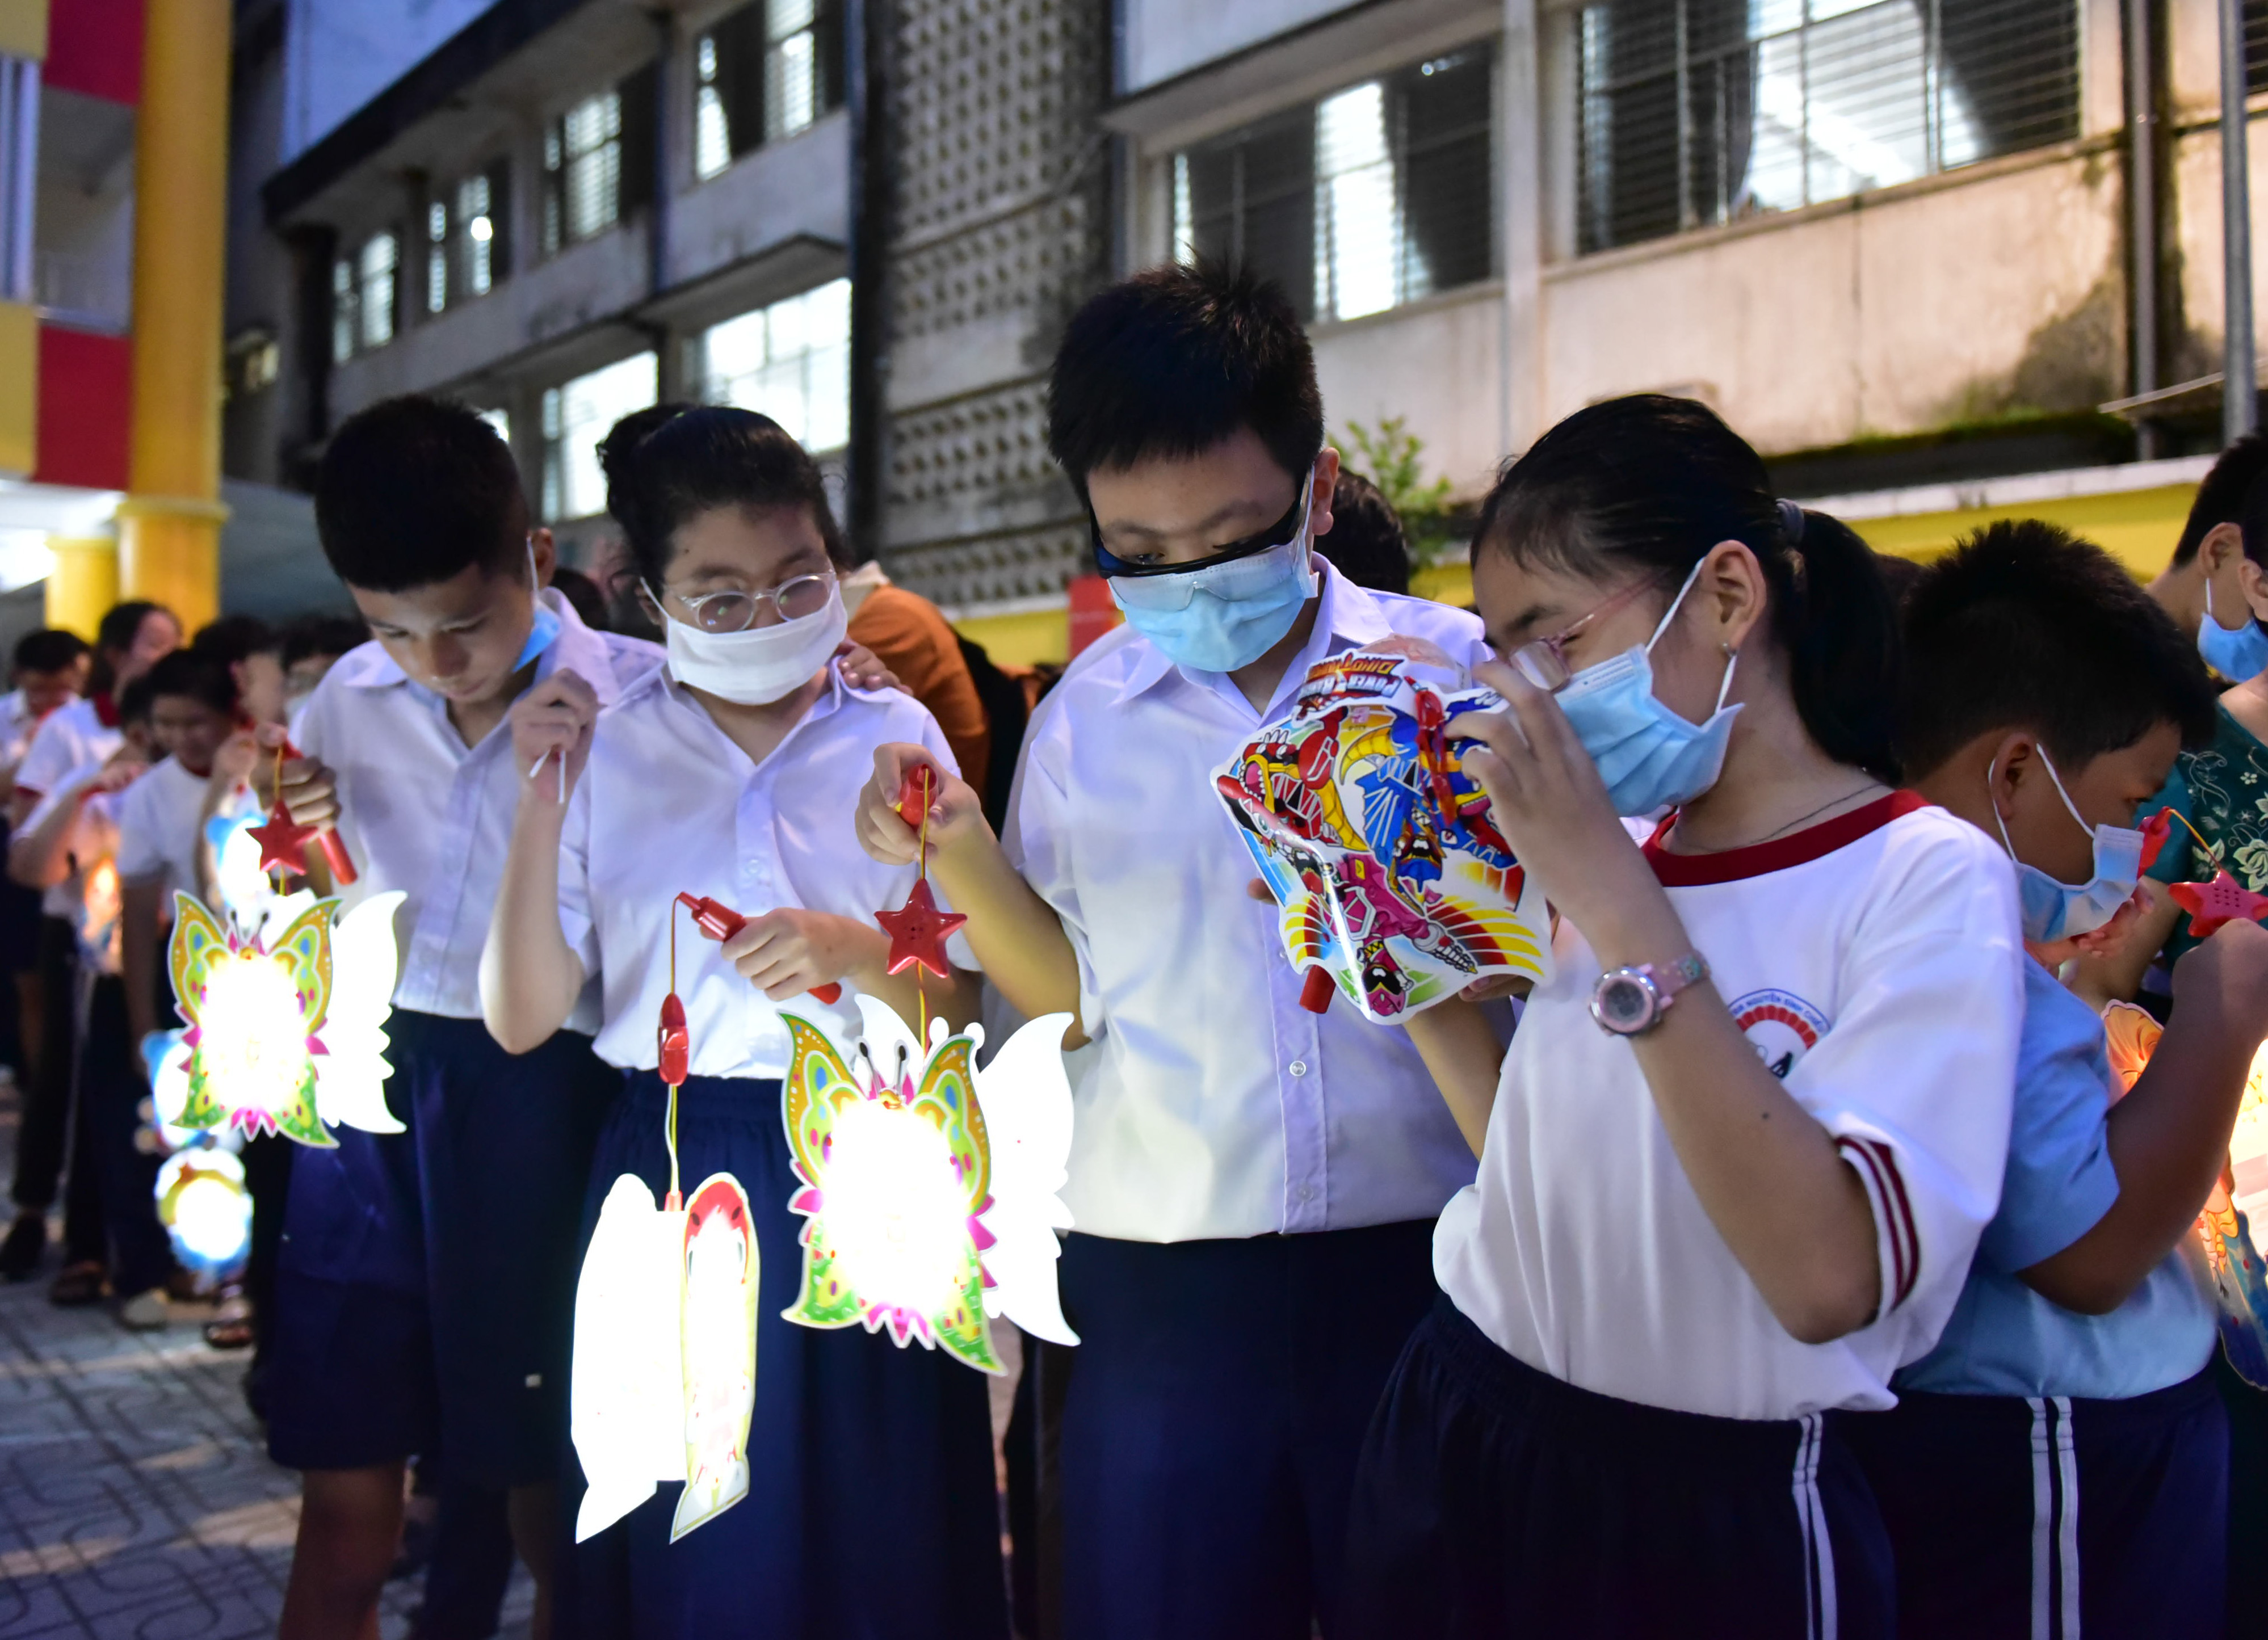 Children participate in a lantern parade to celebrate the Mid-Autumn Festival held by Nguyen Dinh Chieu Special School for the Blind in District 10, Ho Chi Minh City on September 9, 2022. Photo: Ngoc Phuong / Tuoi Tre News